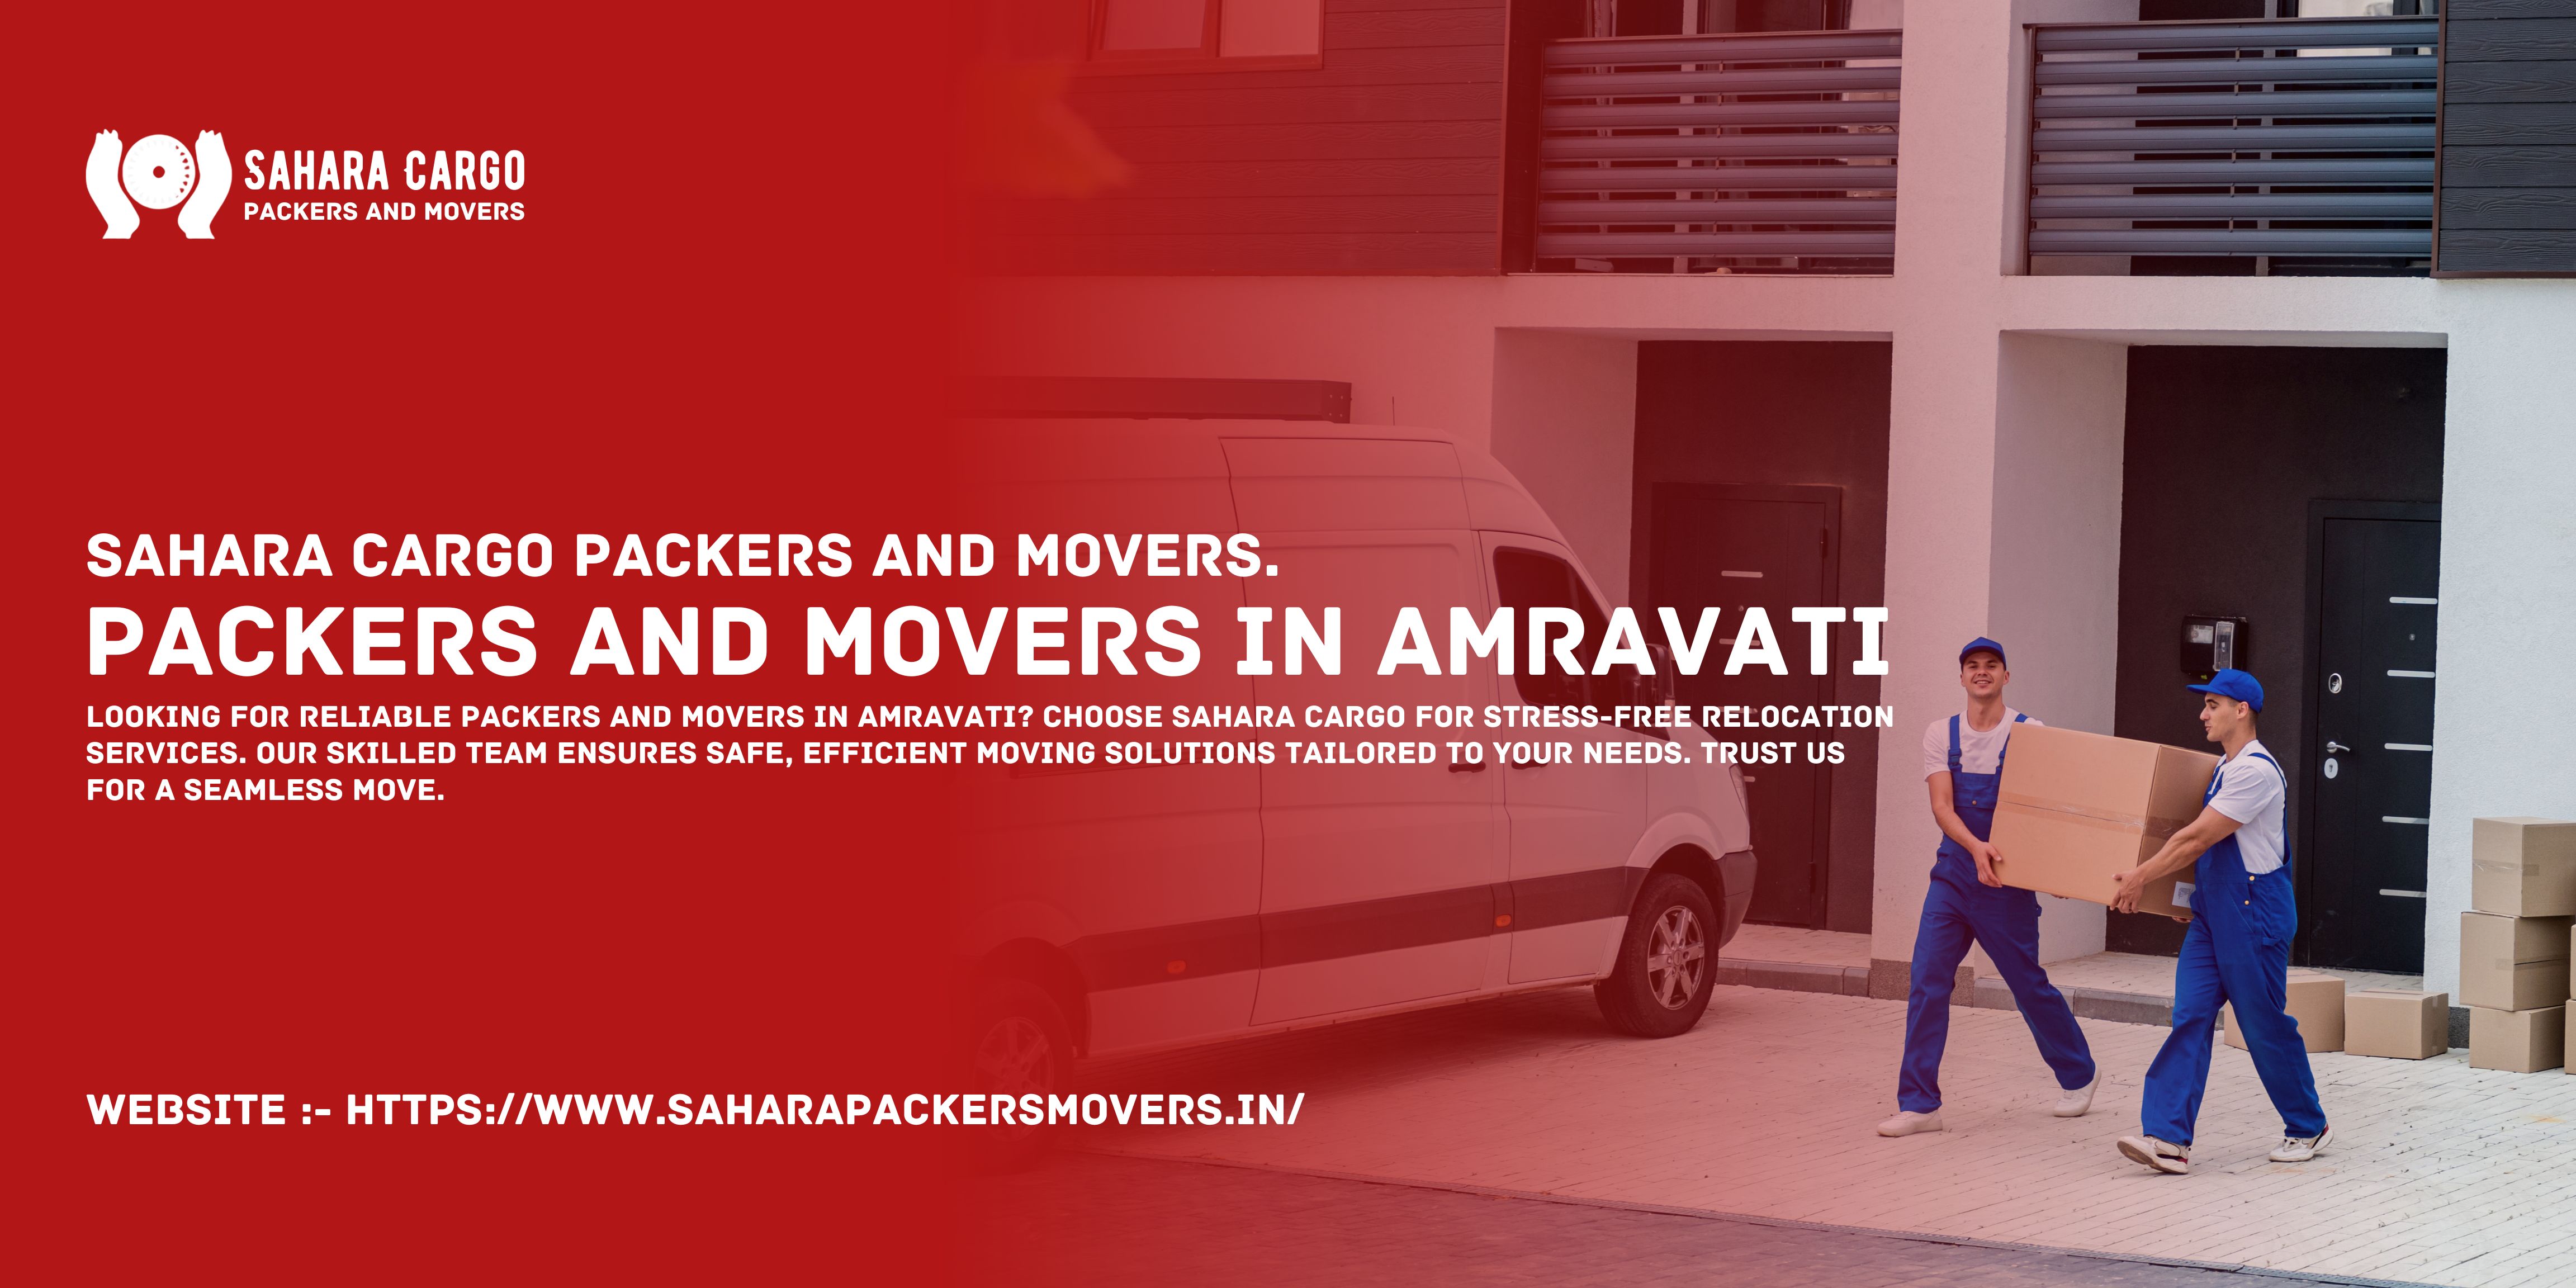 Packers And Movers In Amravati